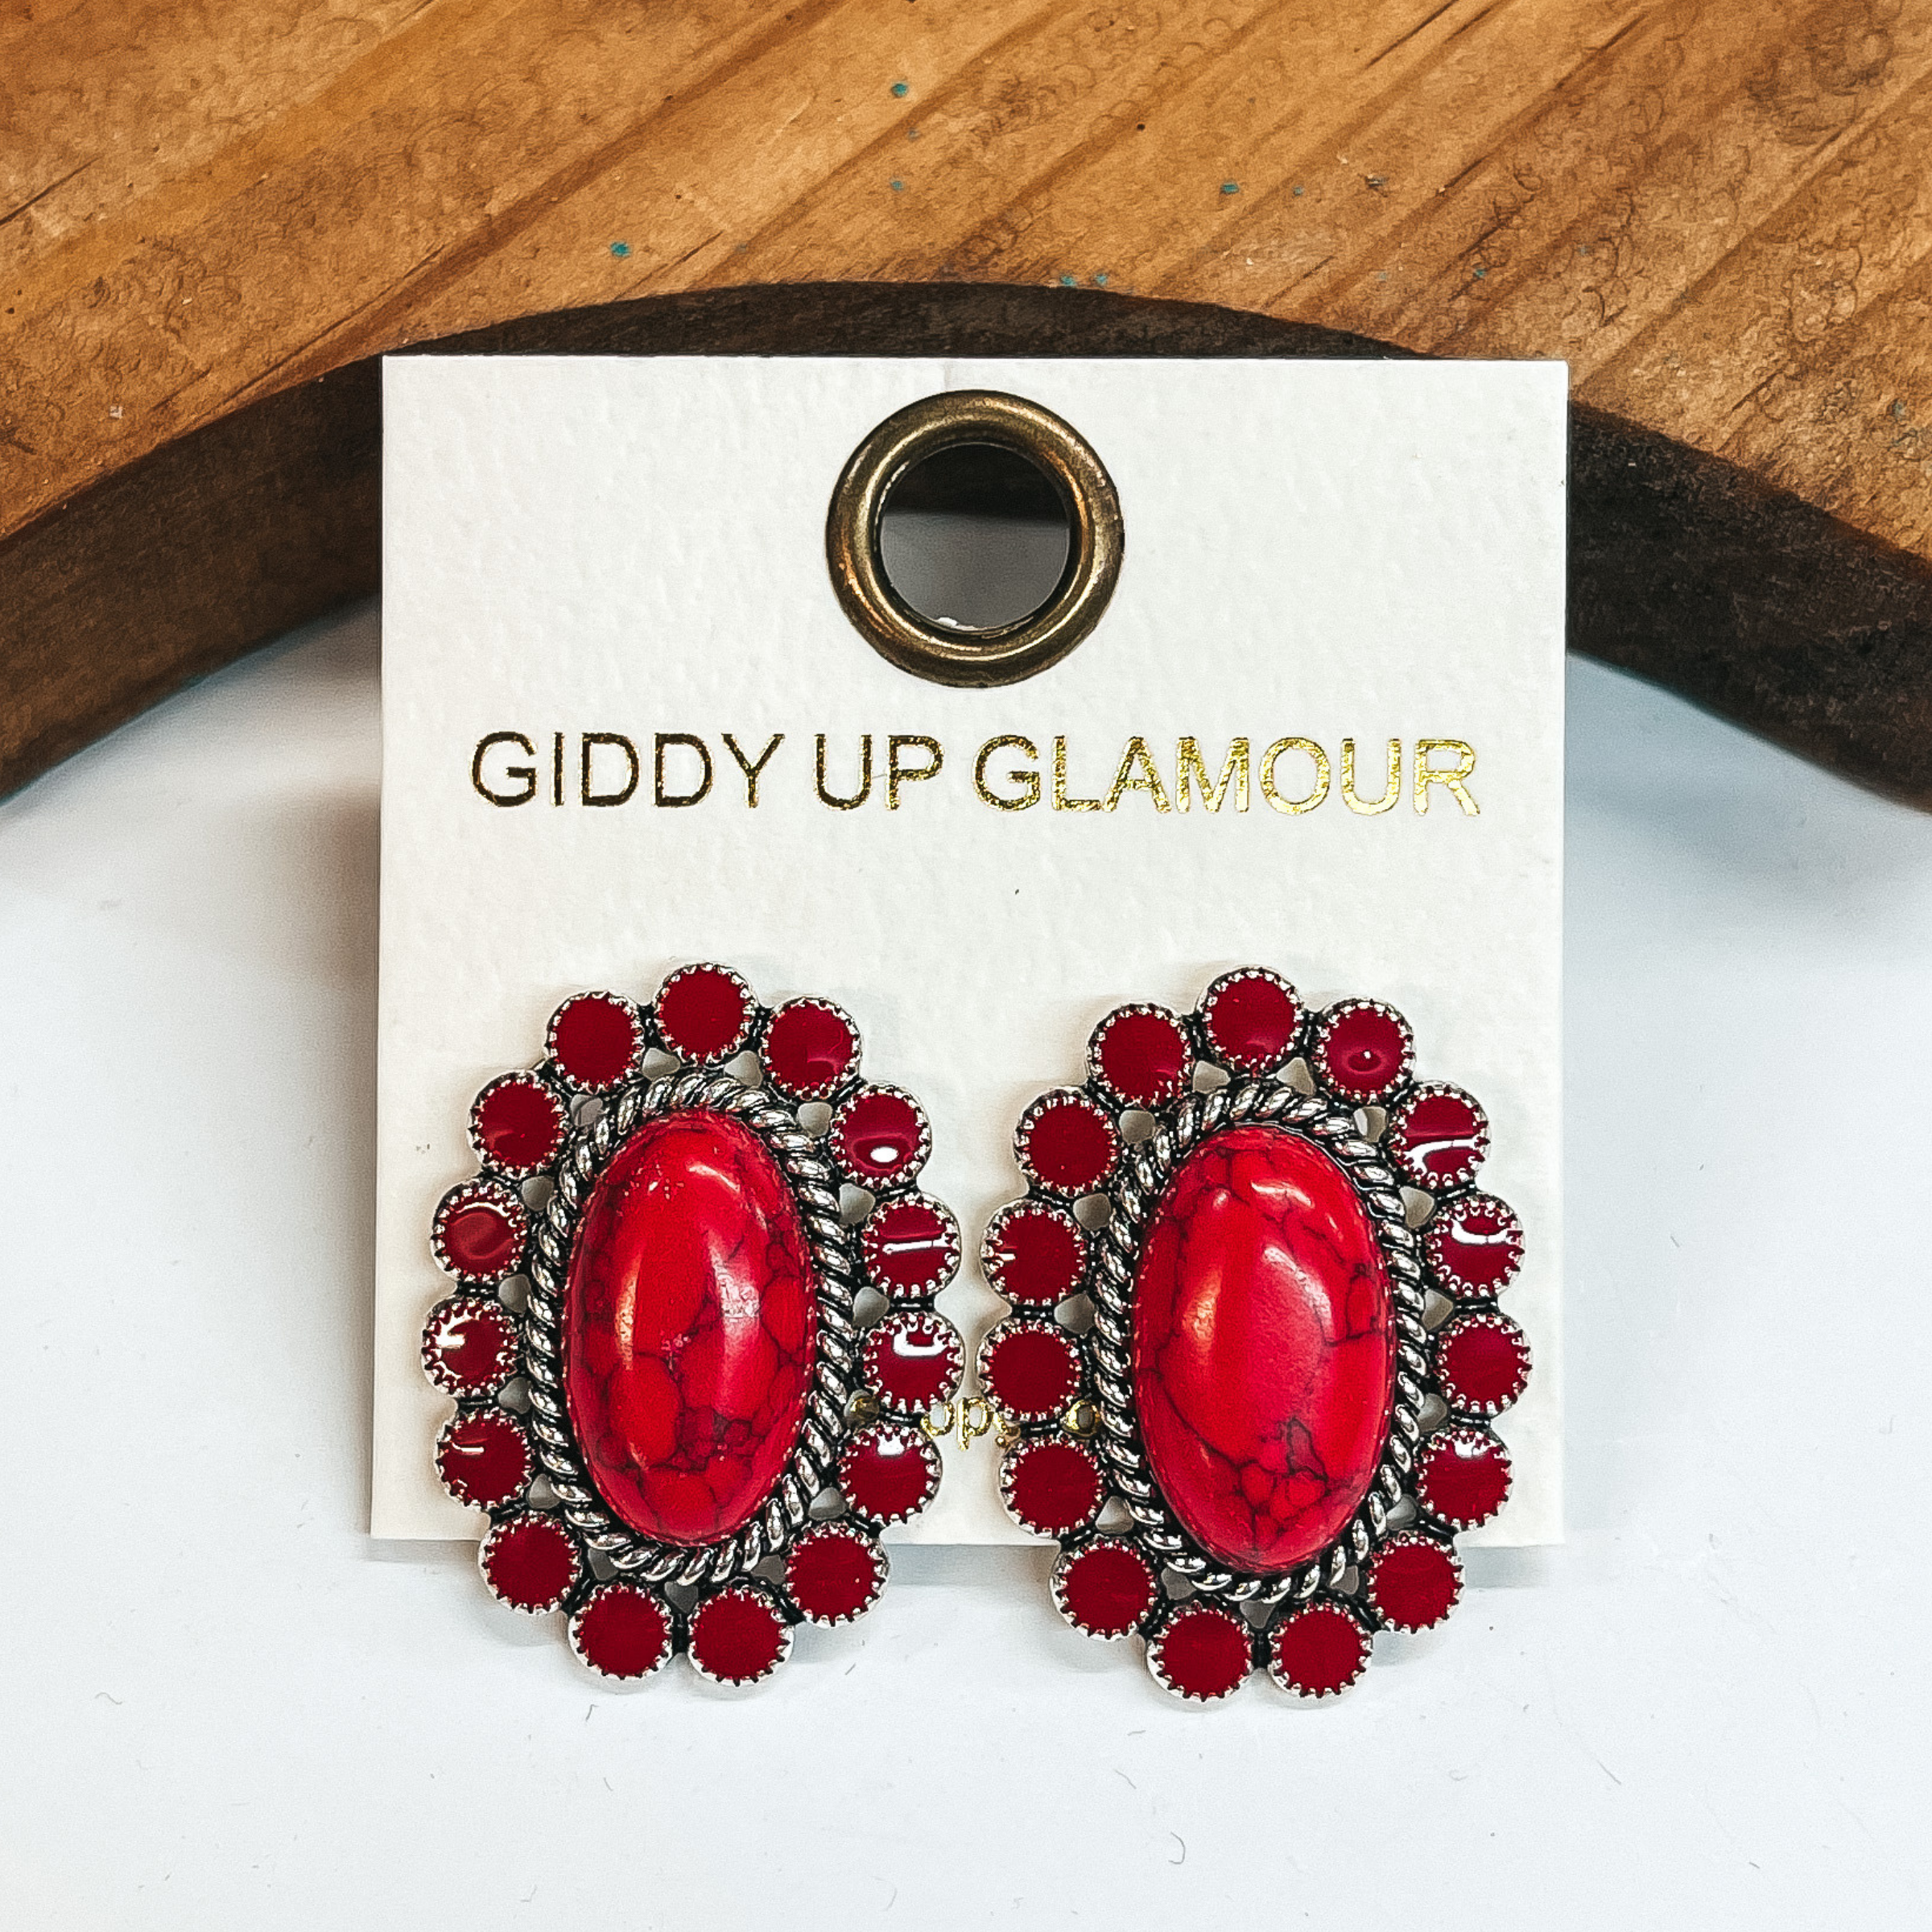 Dark red concho earrings outlined by silver  detailing and dark red circles around.  Taken on a white background and leaned up against a brown block.